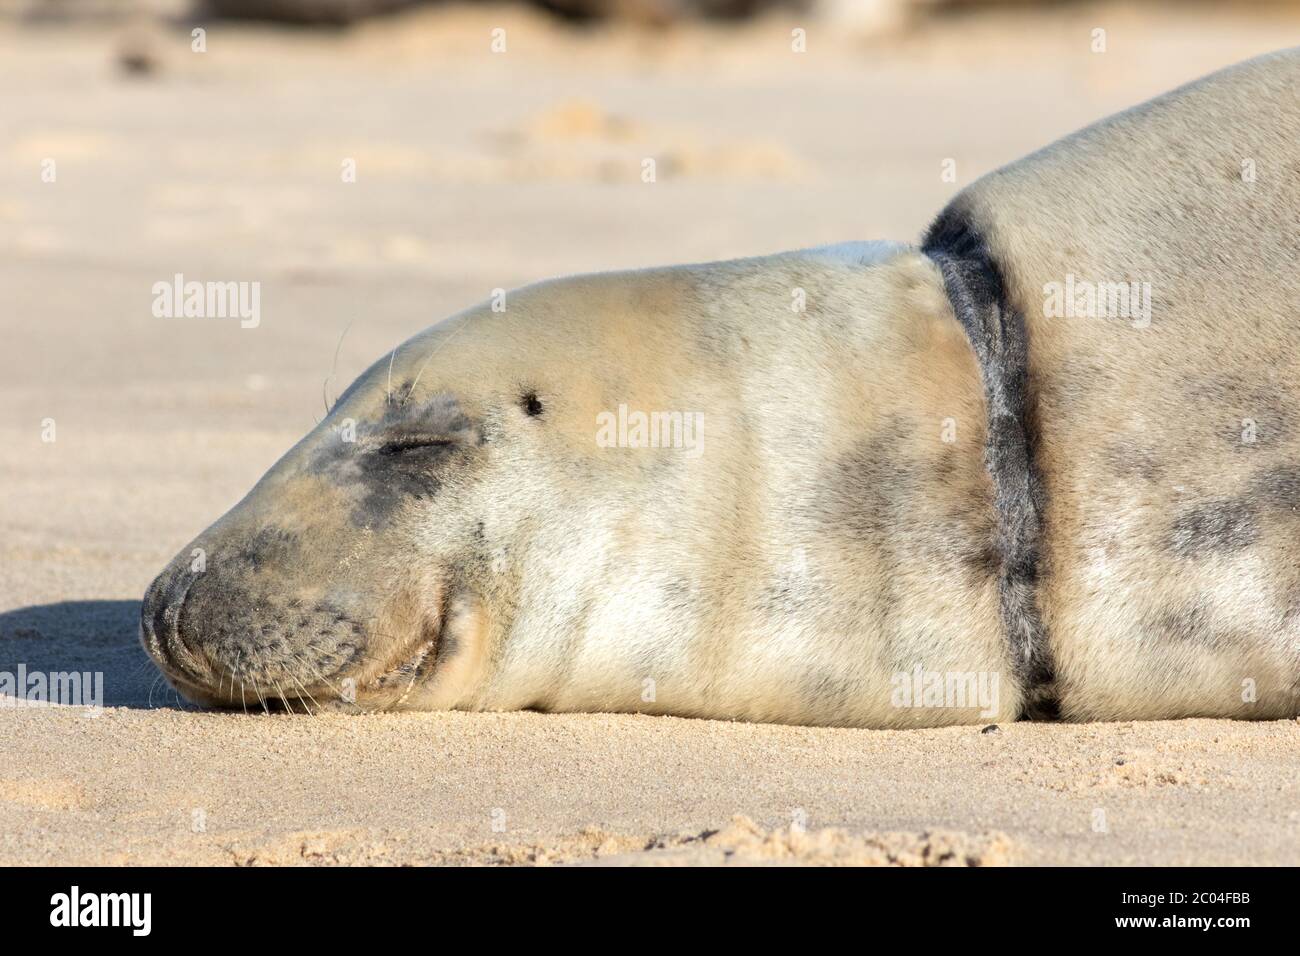 Injured or dead seal with neck wound caused by plastic marine pollution. Rescued animal with old healed injury scar. Beautiful grey seal head in close Stock Photo